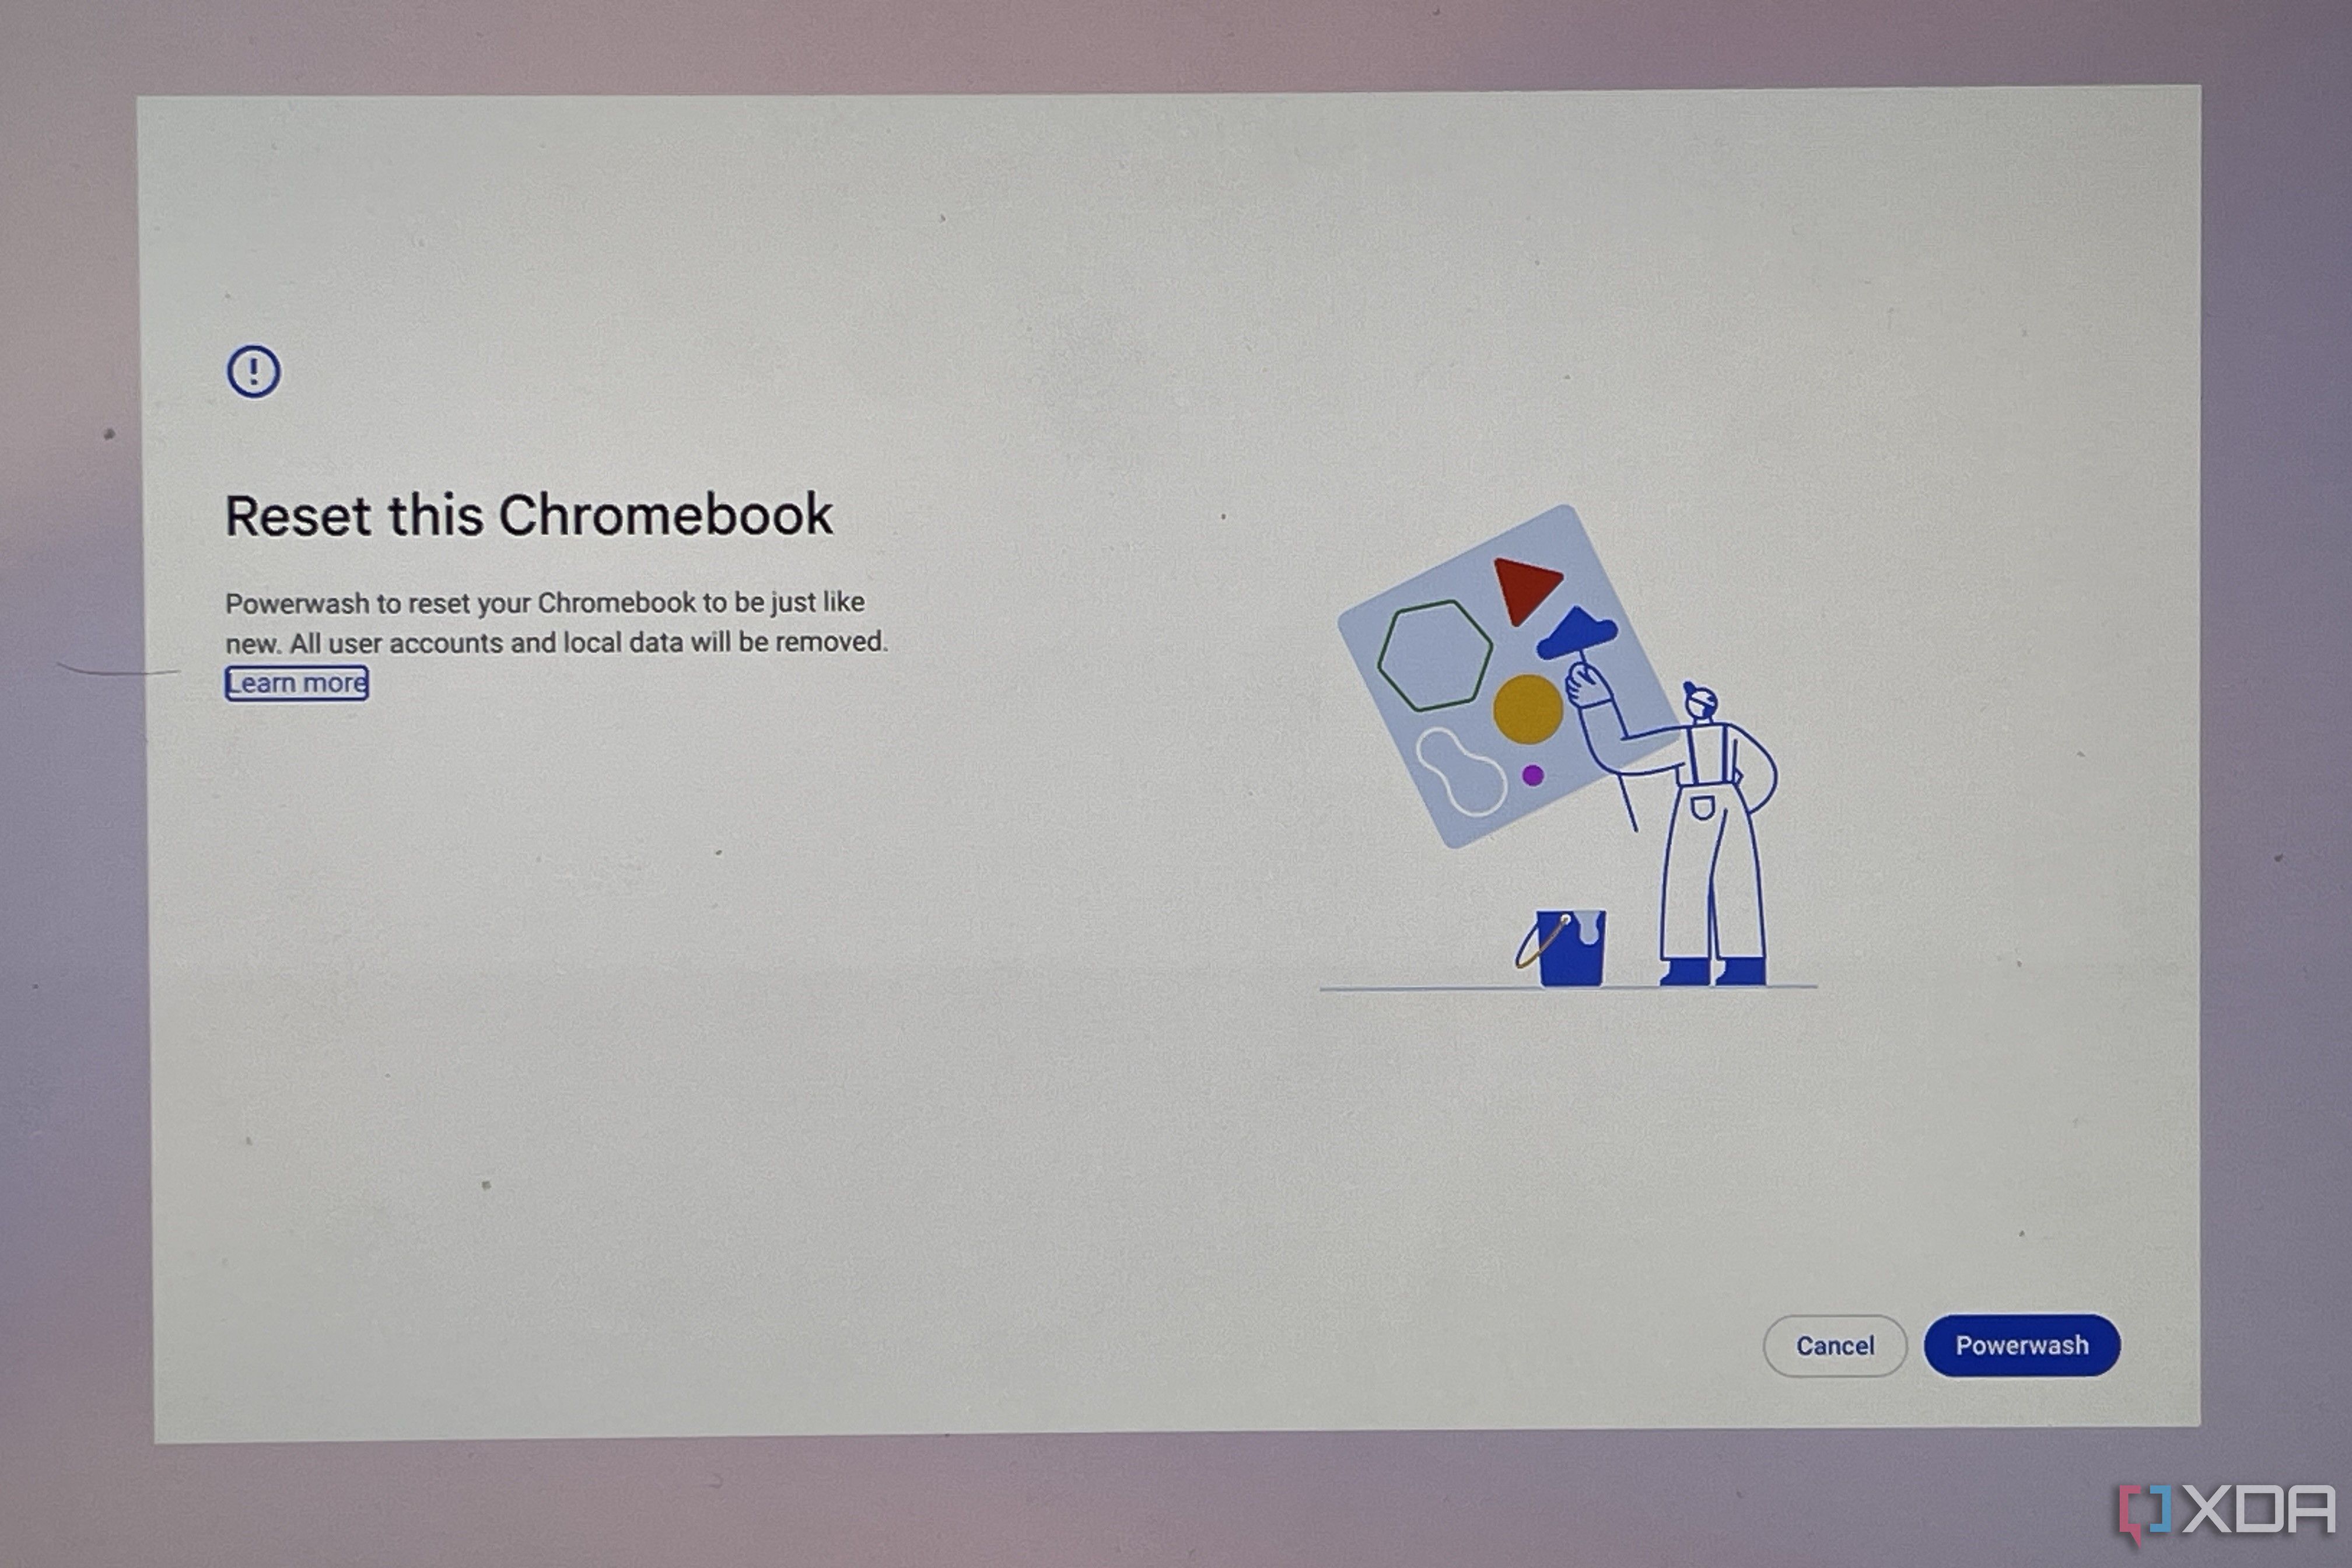 A warning message that you're about to reset a Chromebook